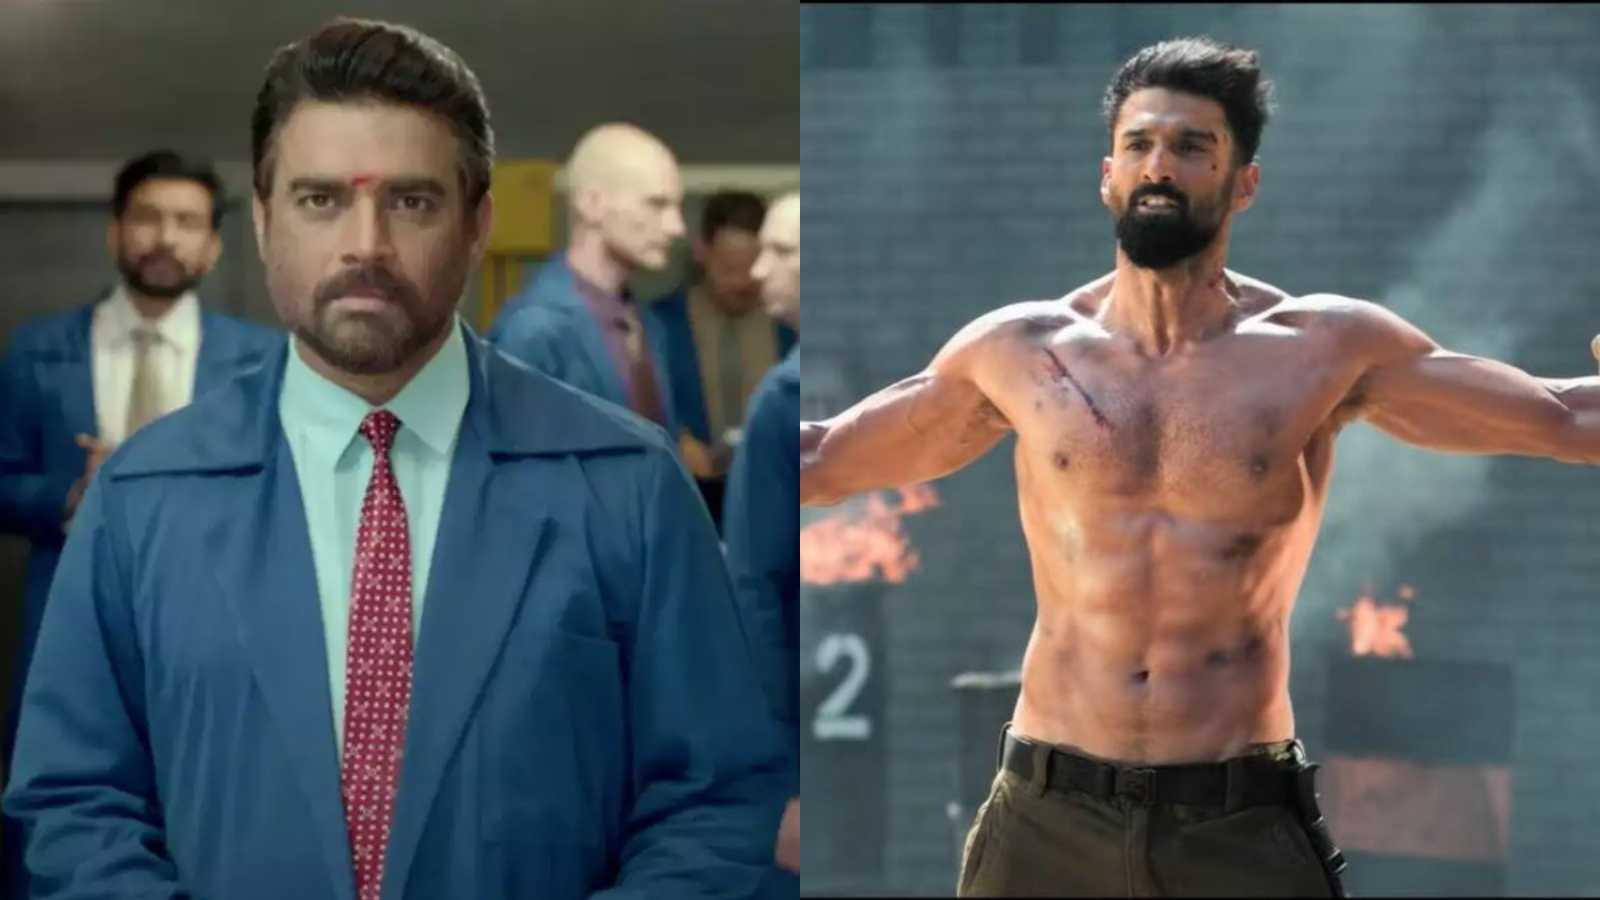 Box office update: R Madhavan's Rocketry and Aditya Roy Kapur's Rashtra Kavach OM join the league of duds on Day 1